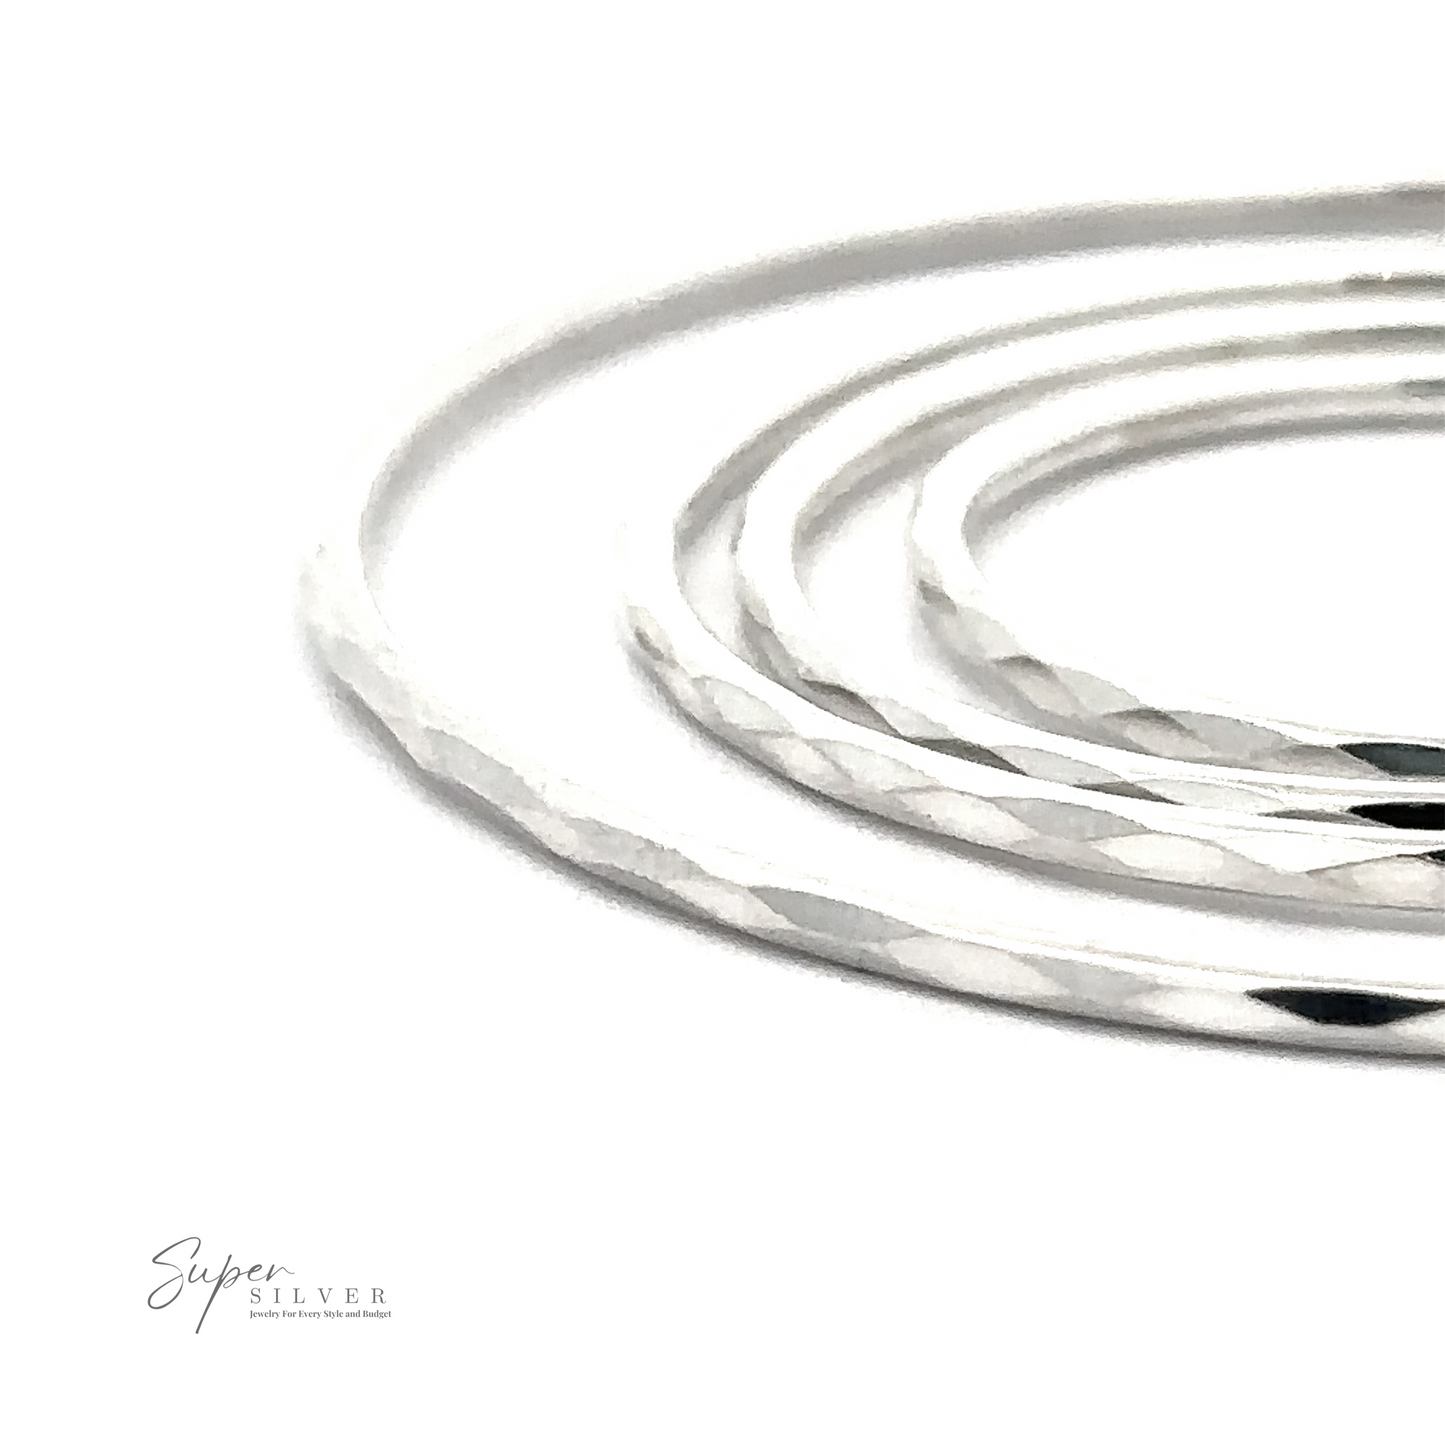 Close-up of 1.5mm Faceted Silver Infinity Hoops with a rhodium finish, displayed against a white background with a logo reading "super silver.